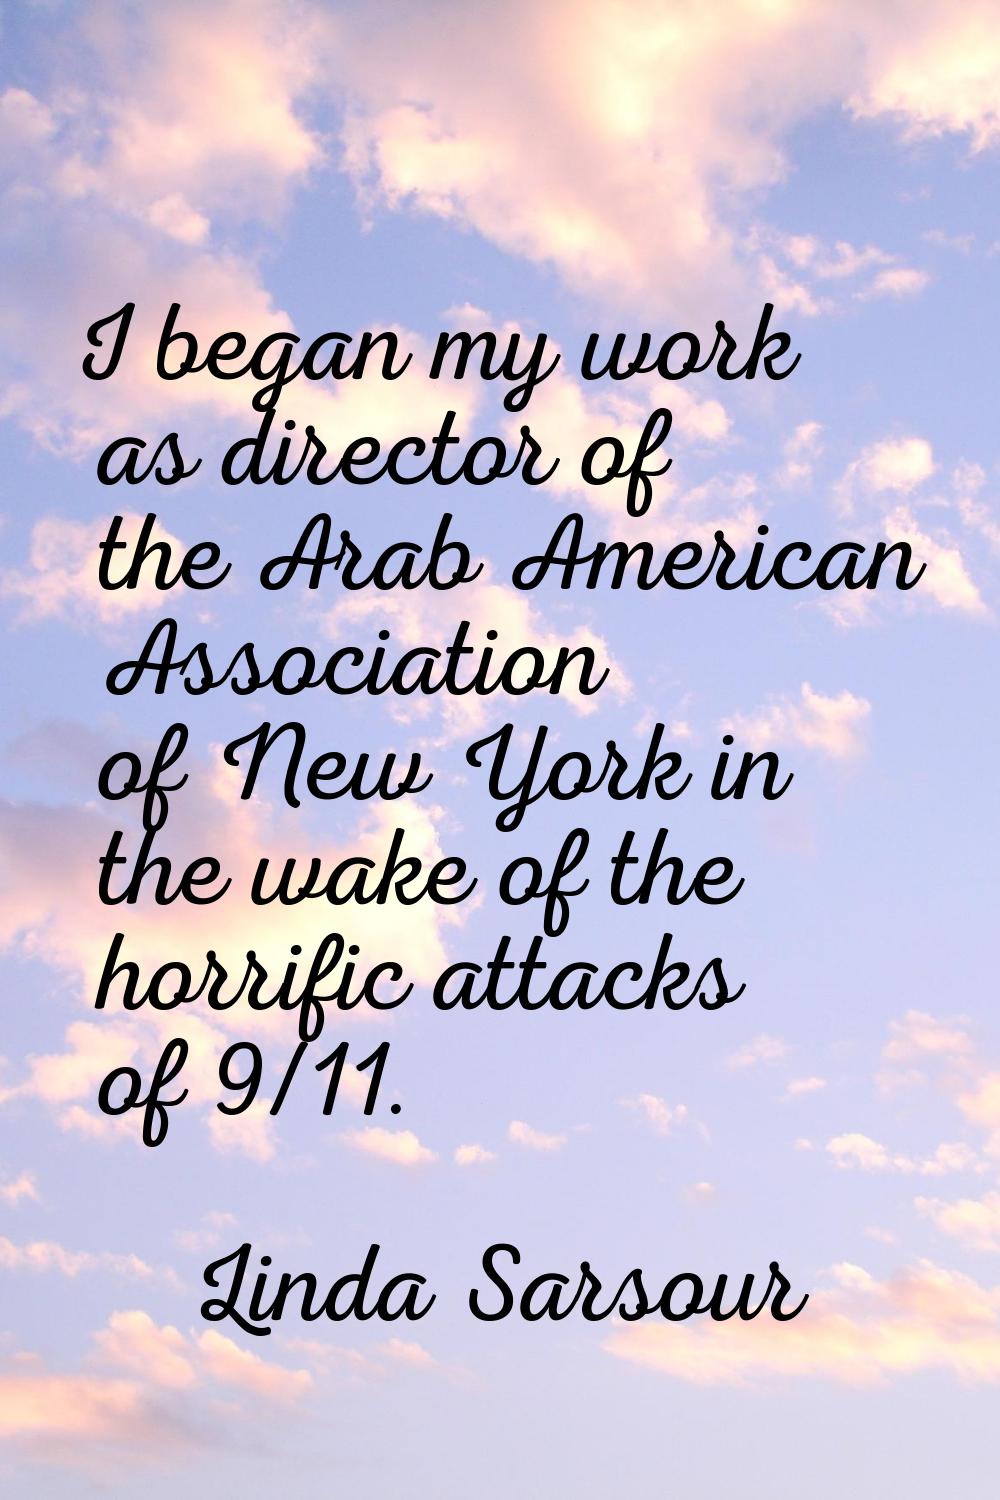 I began my work as director of the Arab American Association of New York in the wake of the horrifi